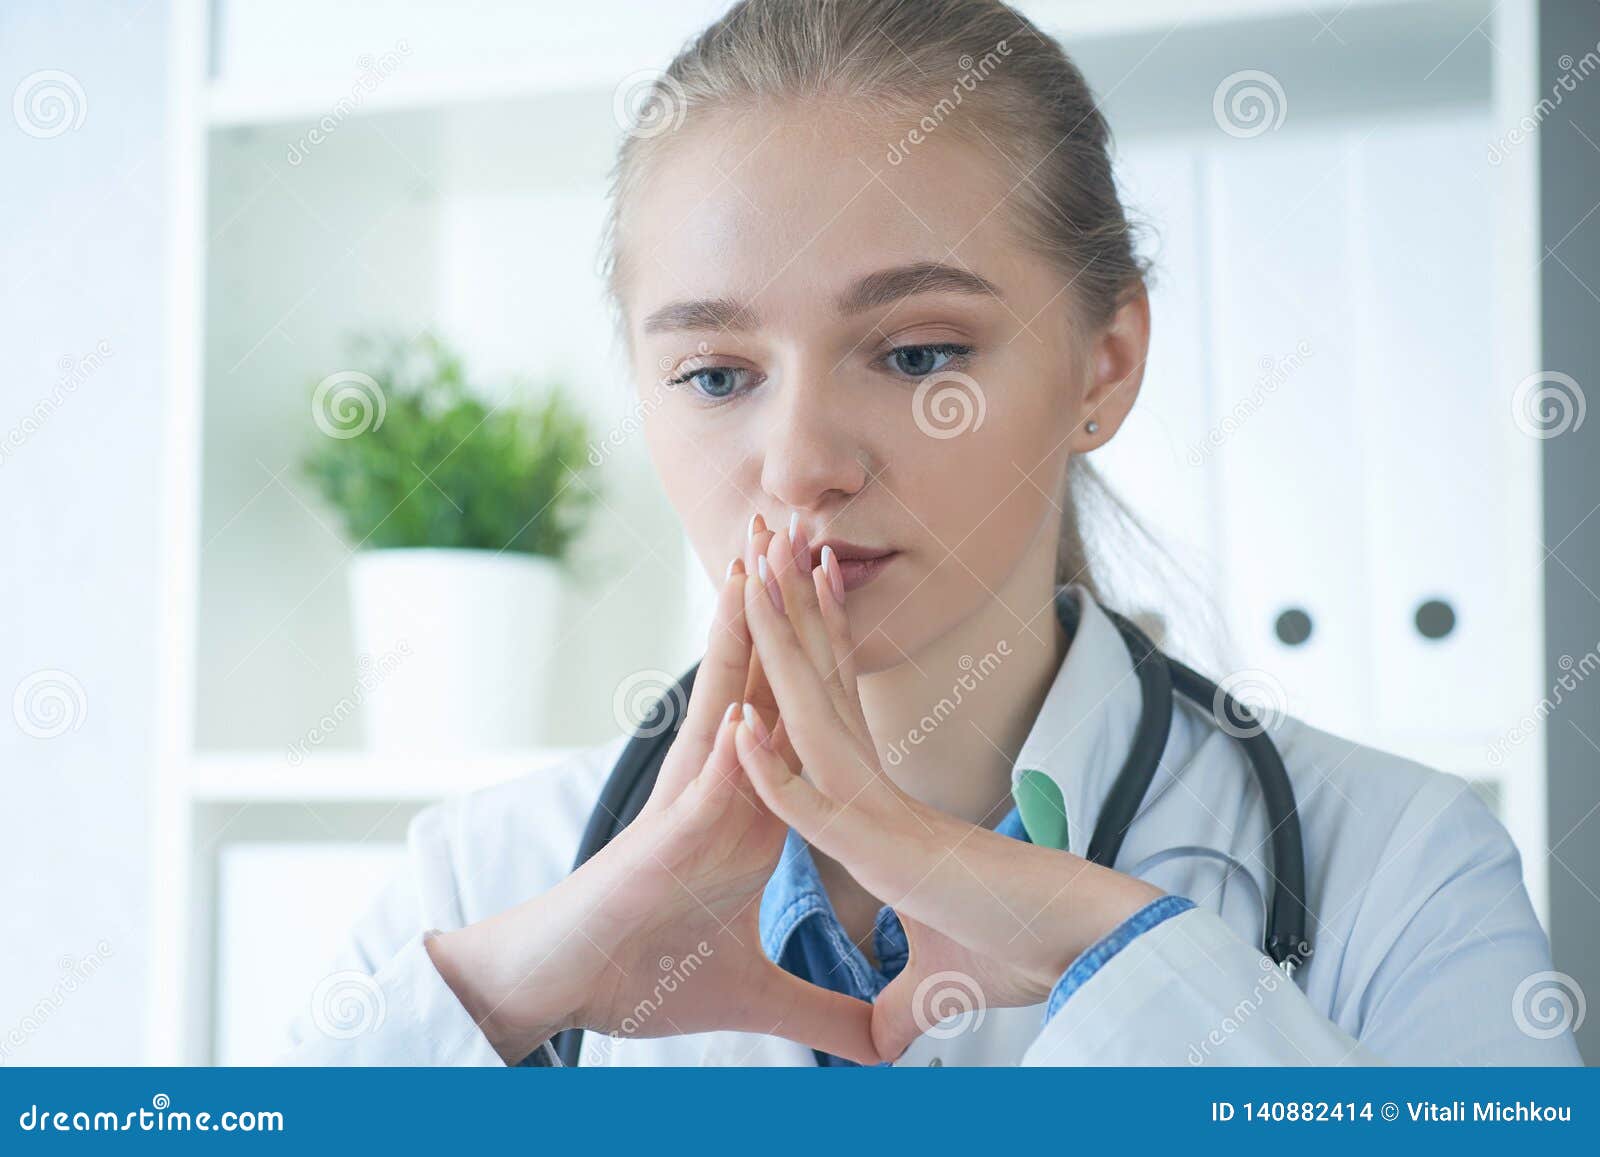 Young Serious Blonde Doctor Woman Sitting In Medical Office With Hands